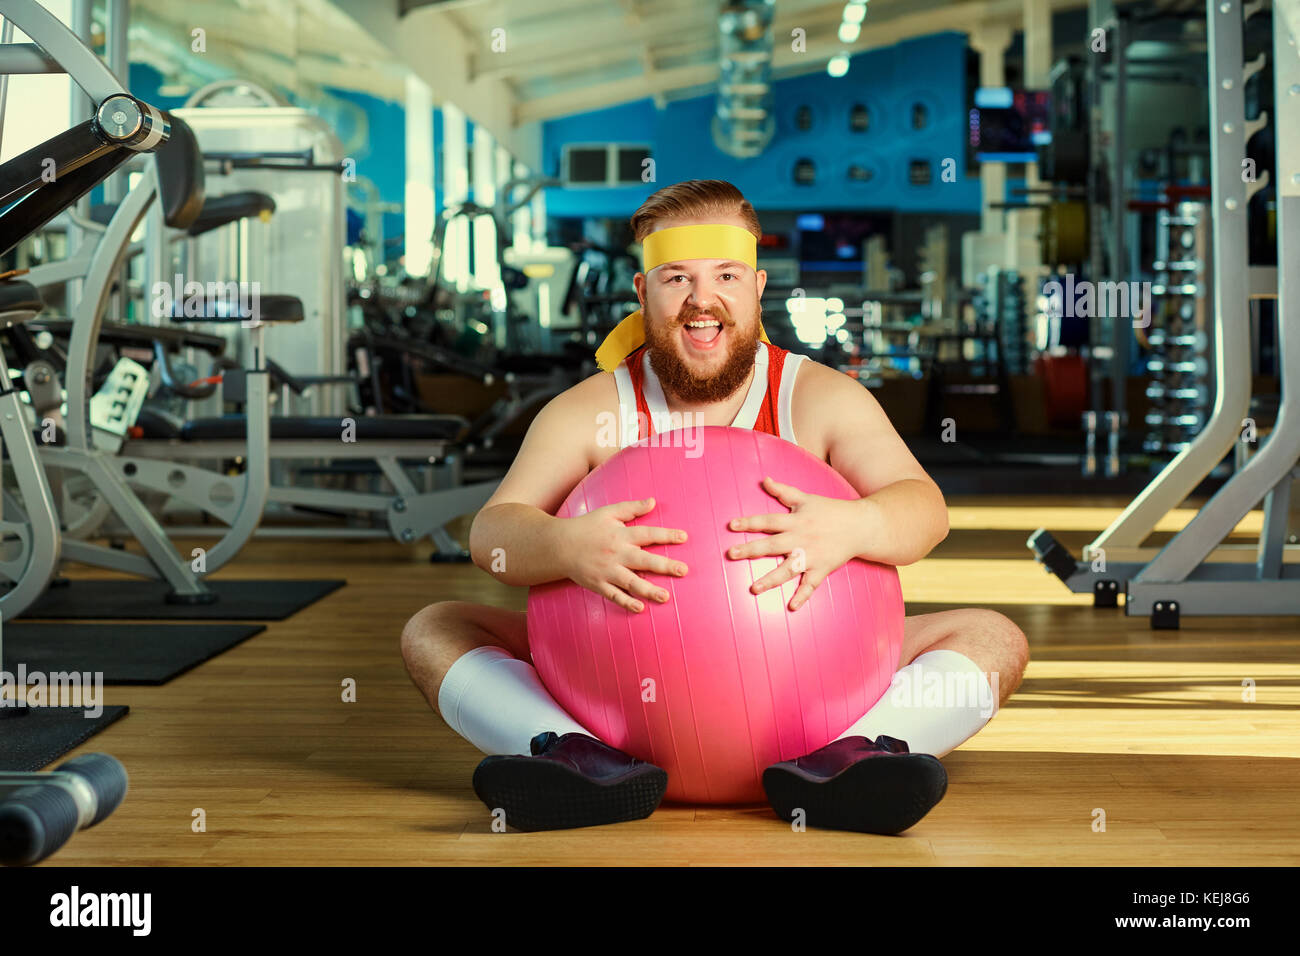 Funny fat man with a ball sitting on the floor smiling at the gy Stock Photo